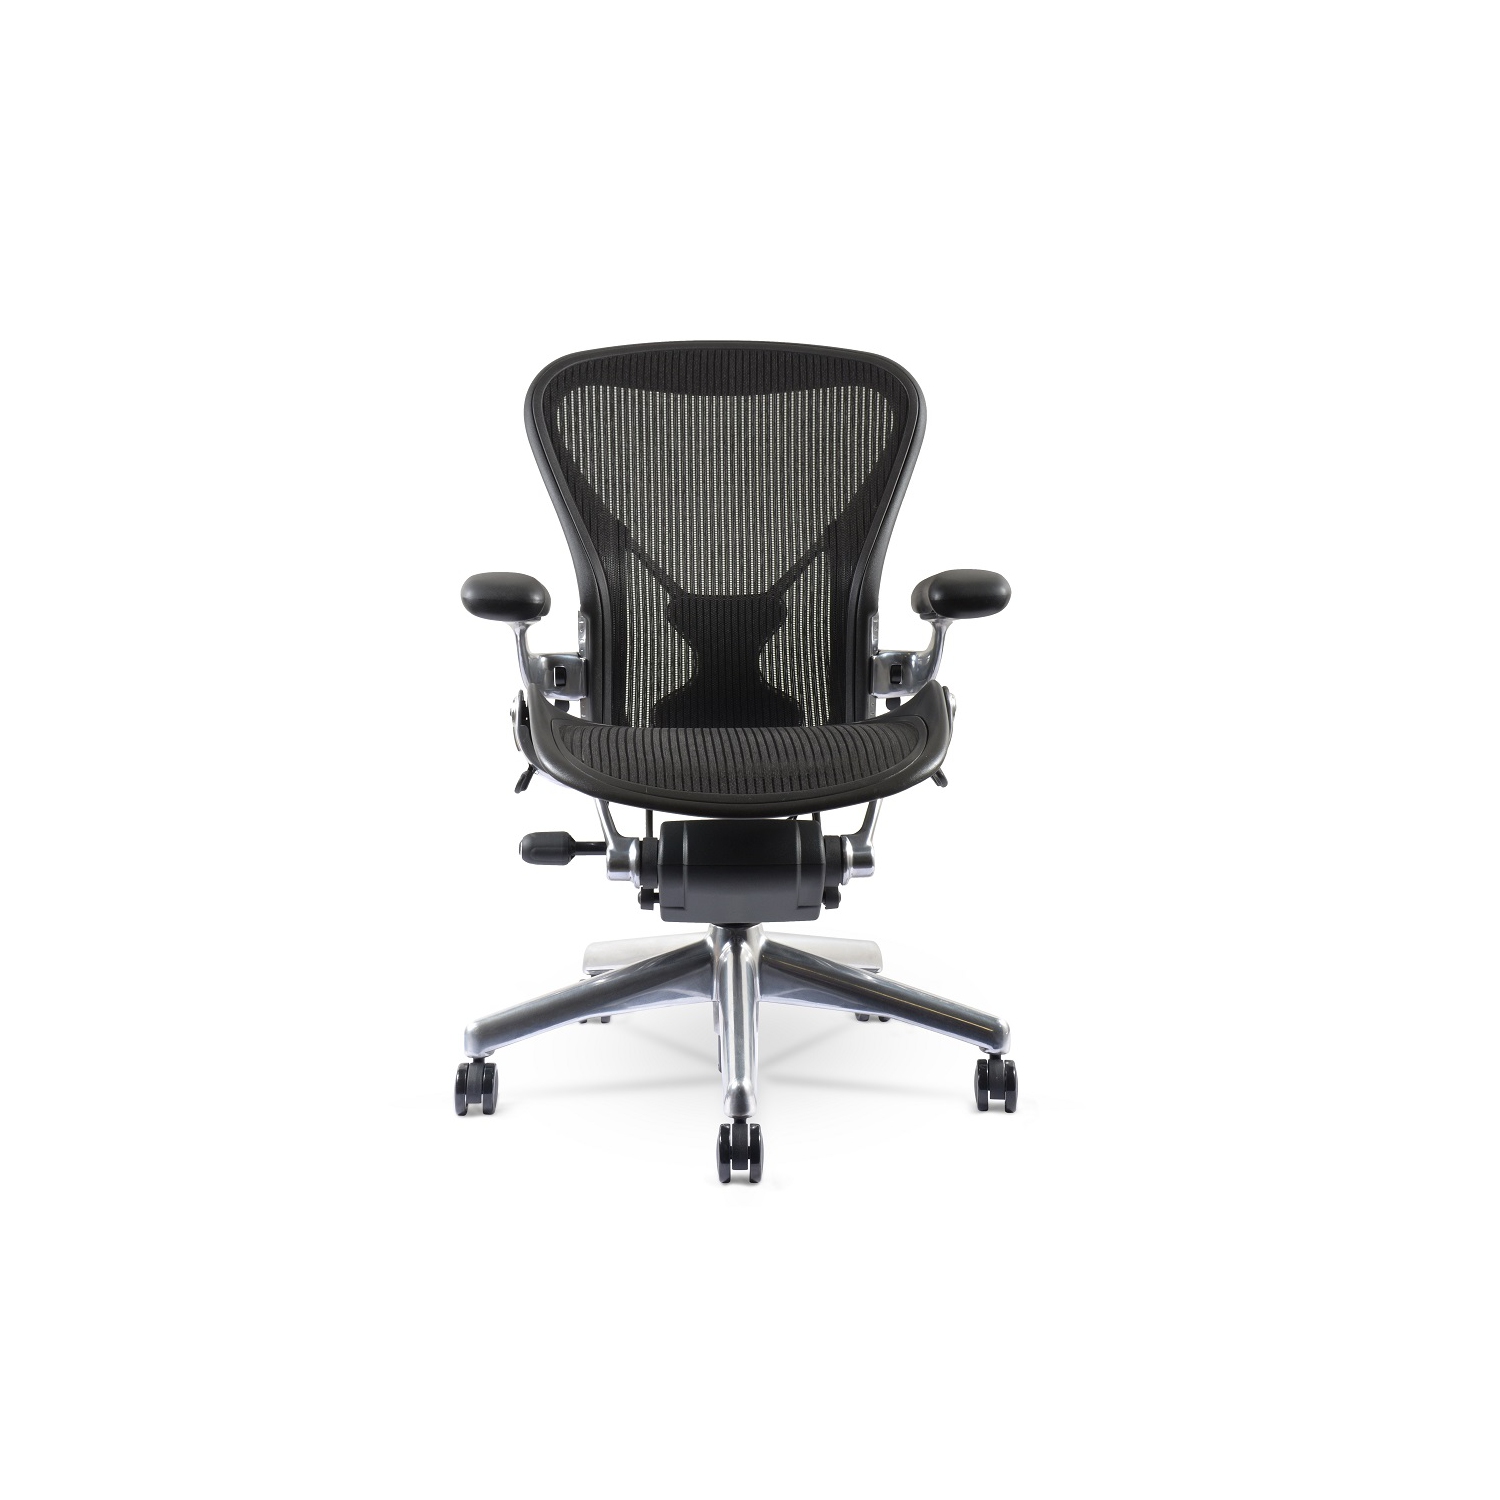 Herman Miller Classic Aeron Chair | Chrome | Size B | Fully Adjustable | Posture Fit | Roller Index| Refurbished/Renewed by Chairorama